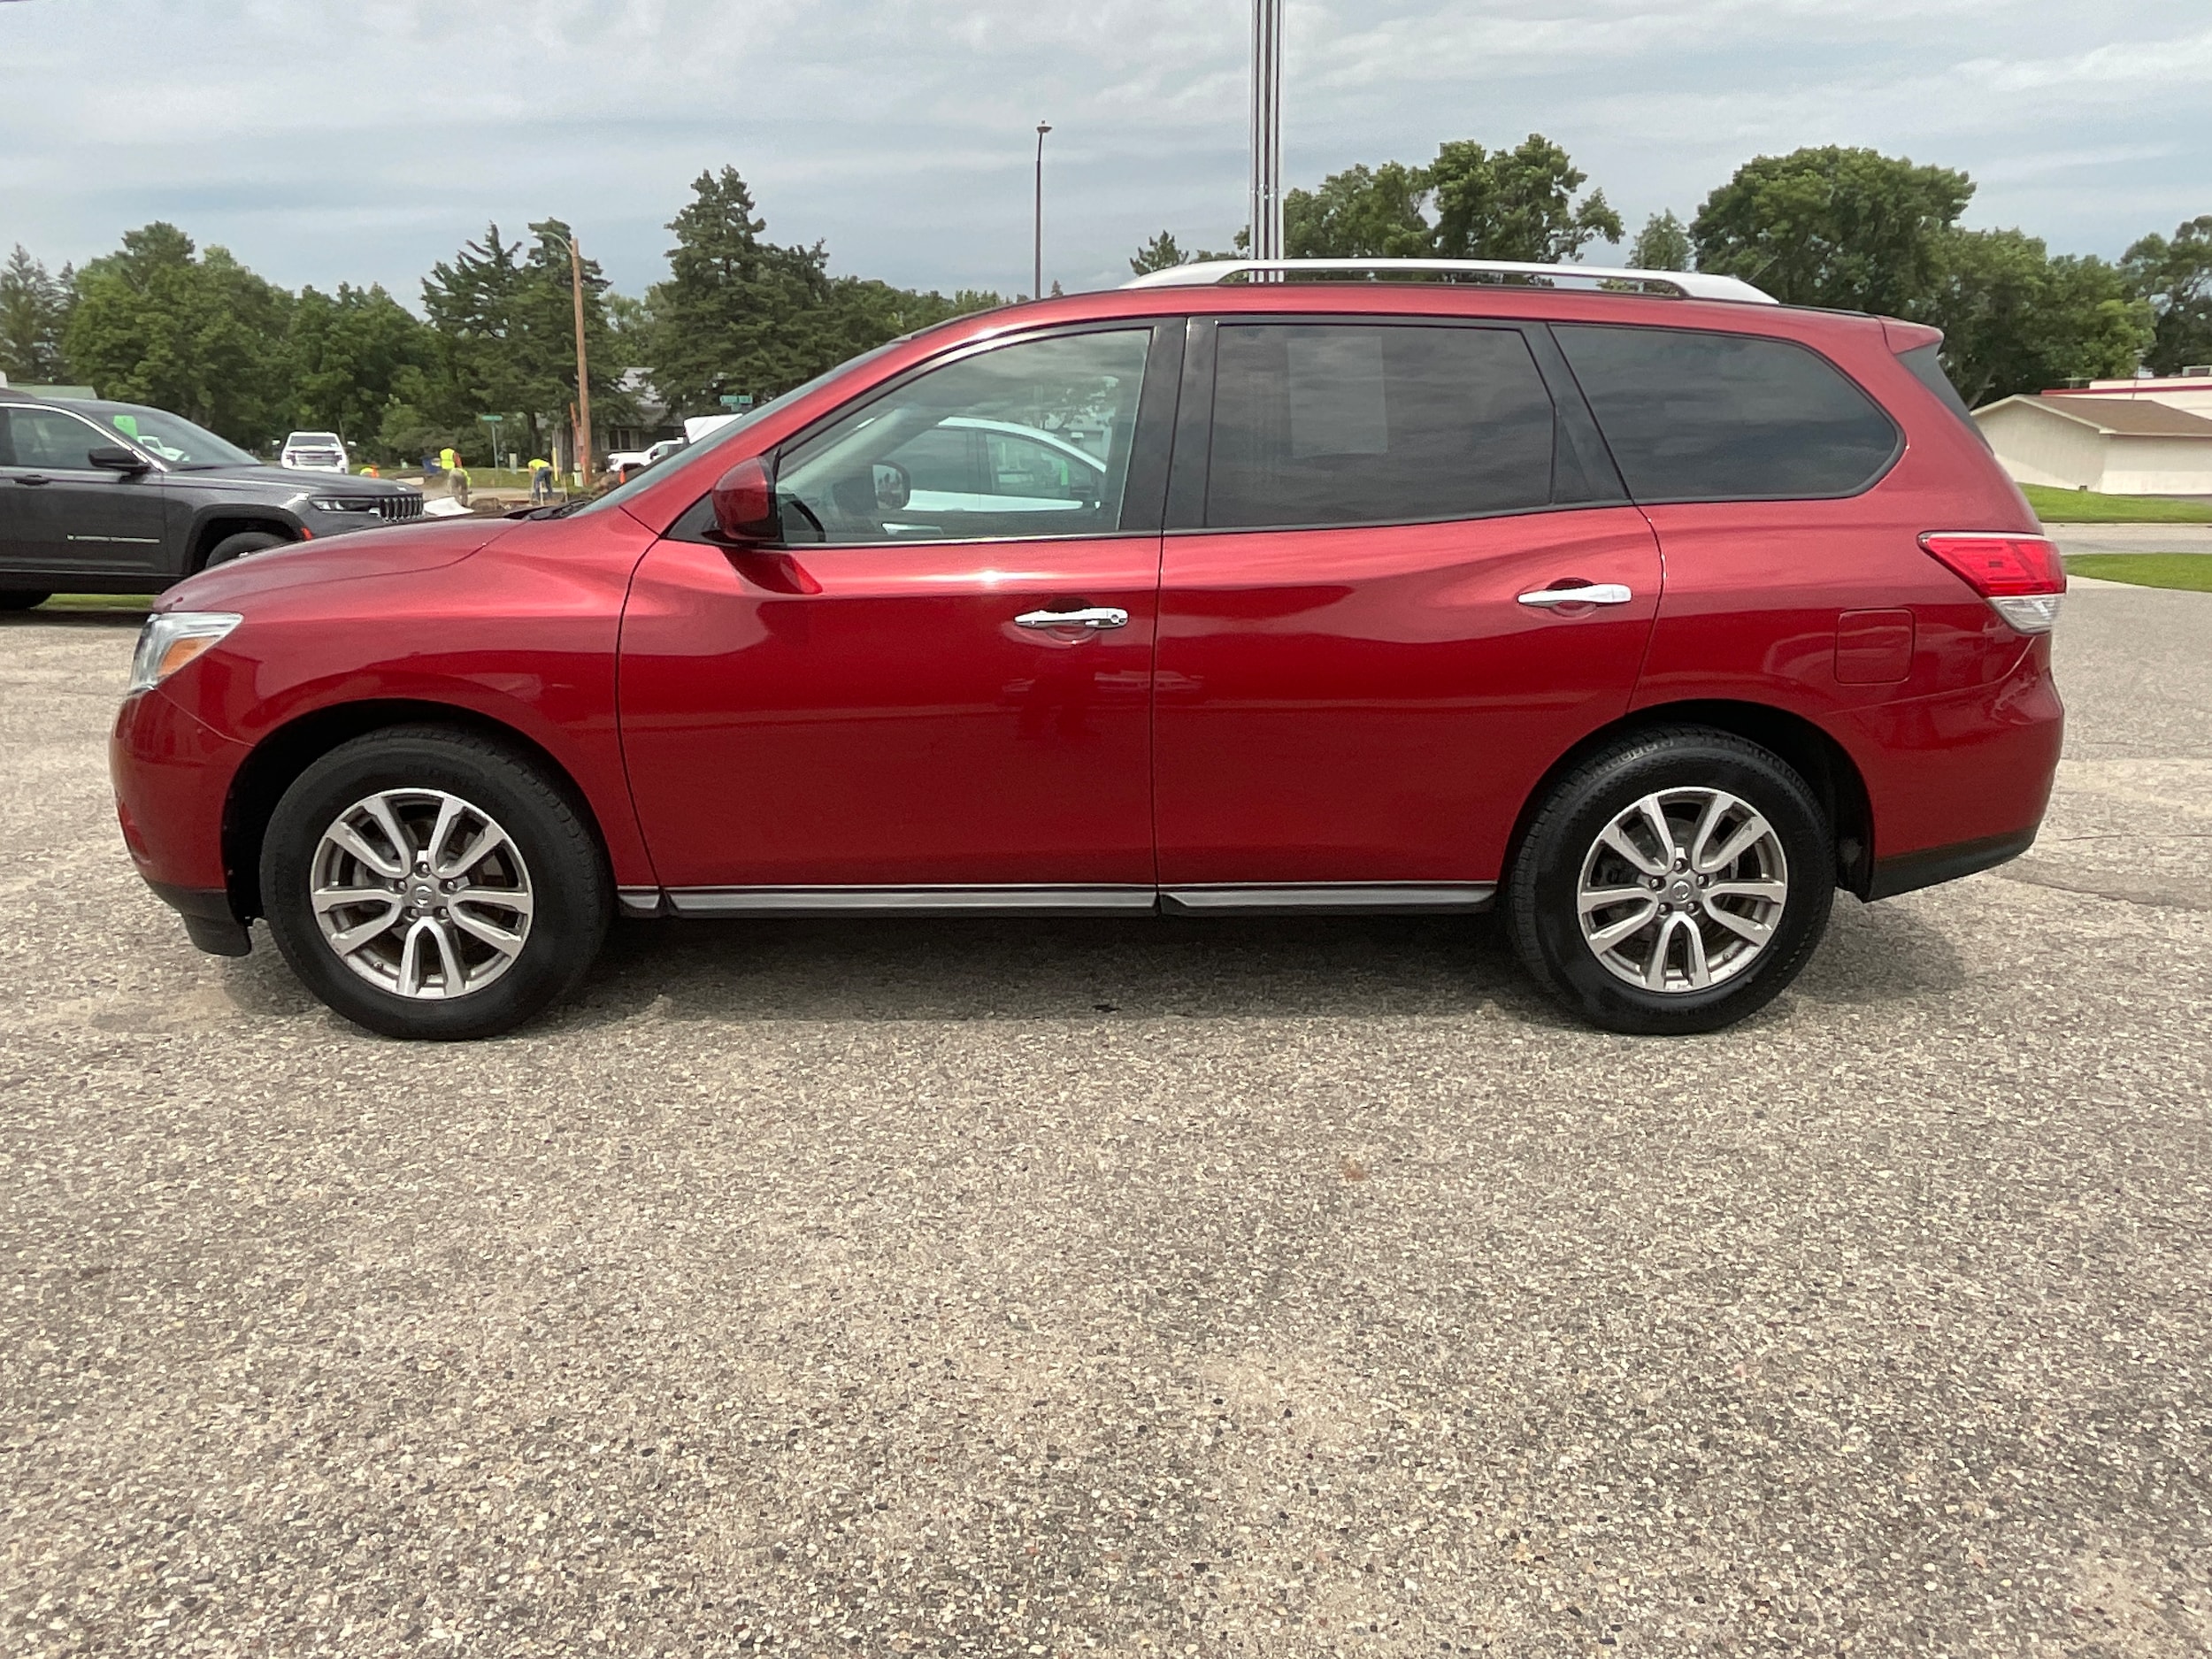 Used 2016 Nissan Pathfinder S with VIN 5N1AR2MM7GC600439 for sale in Litchfield, Minnesota